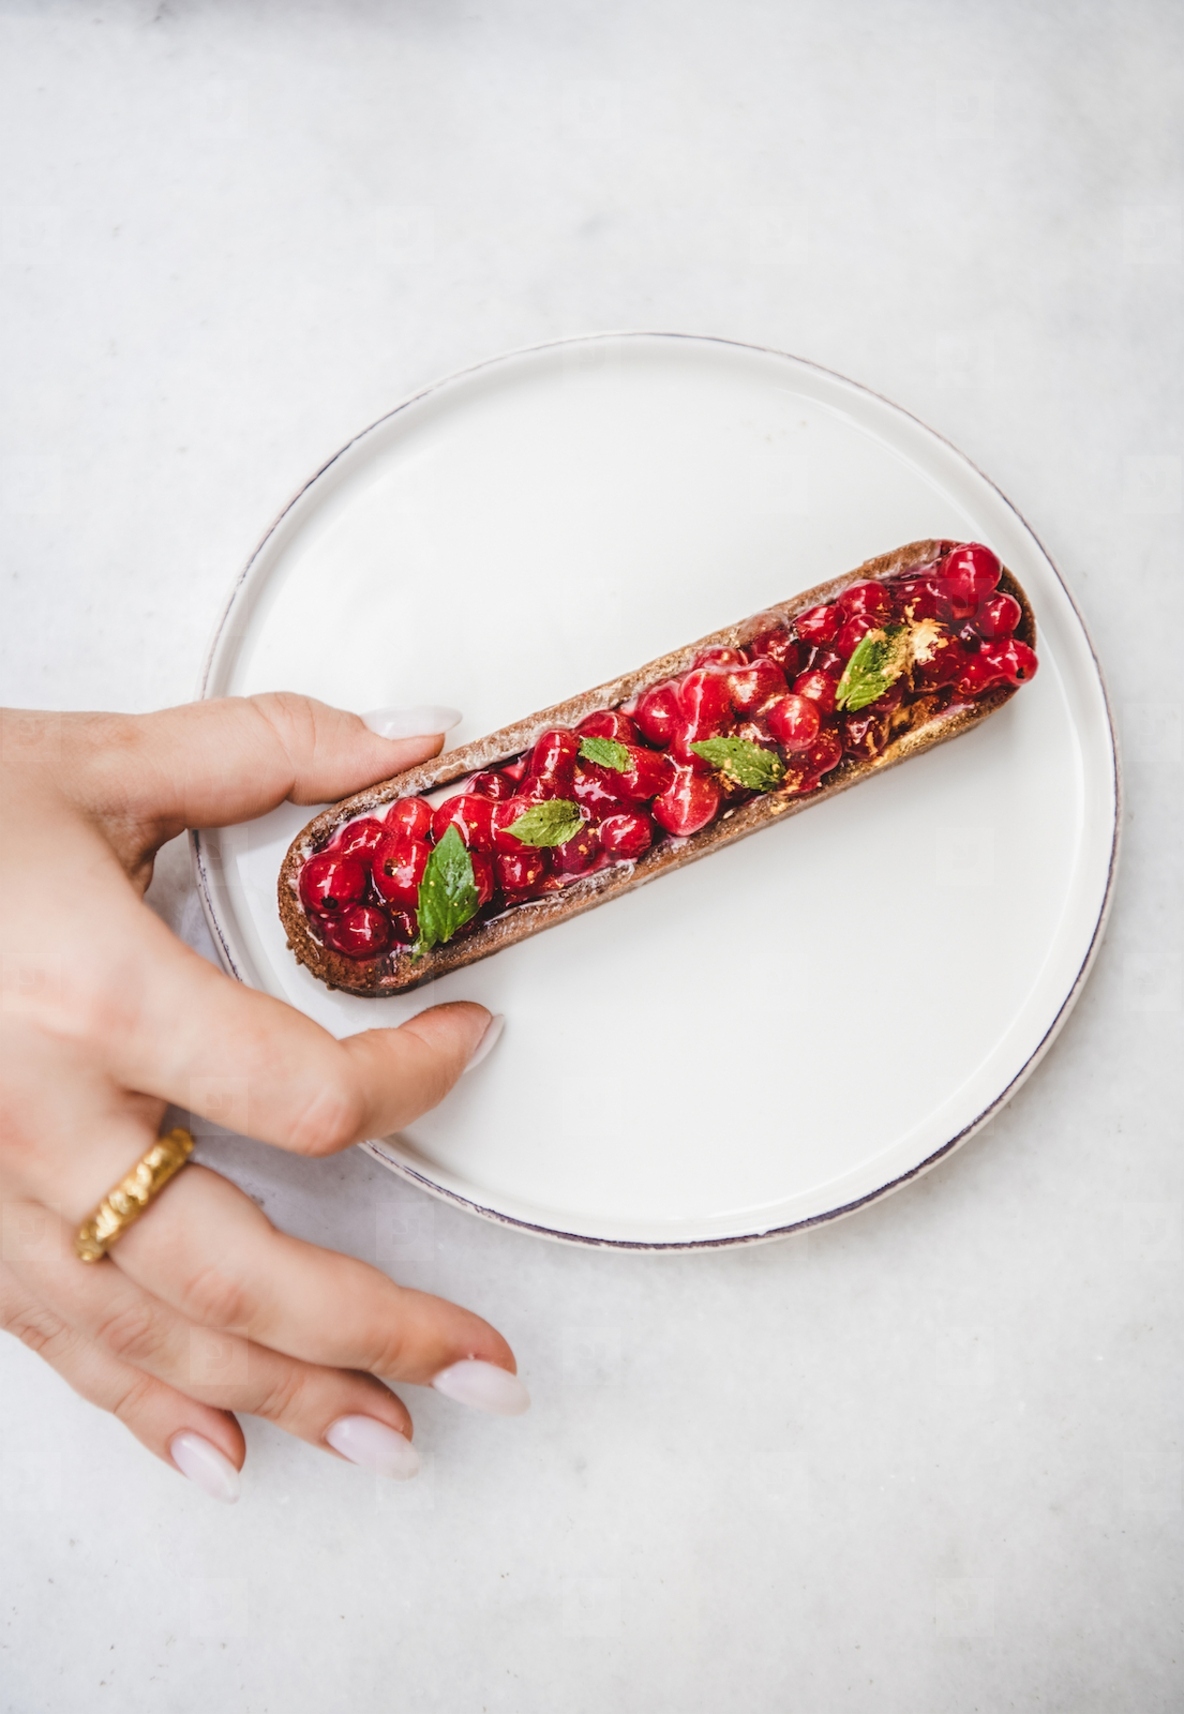 Womans hand taking tart with seasonal fresh red currant berries